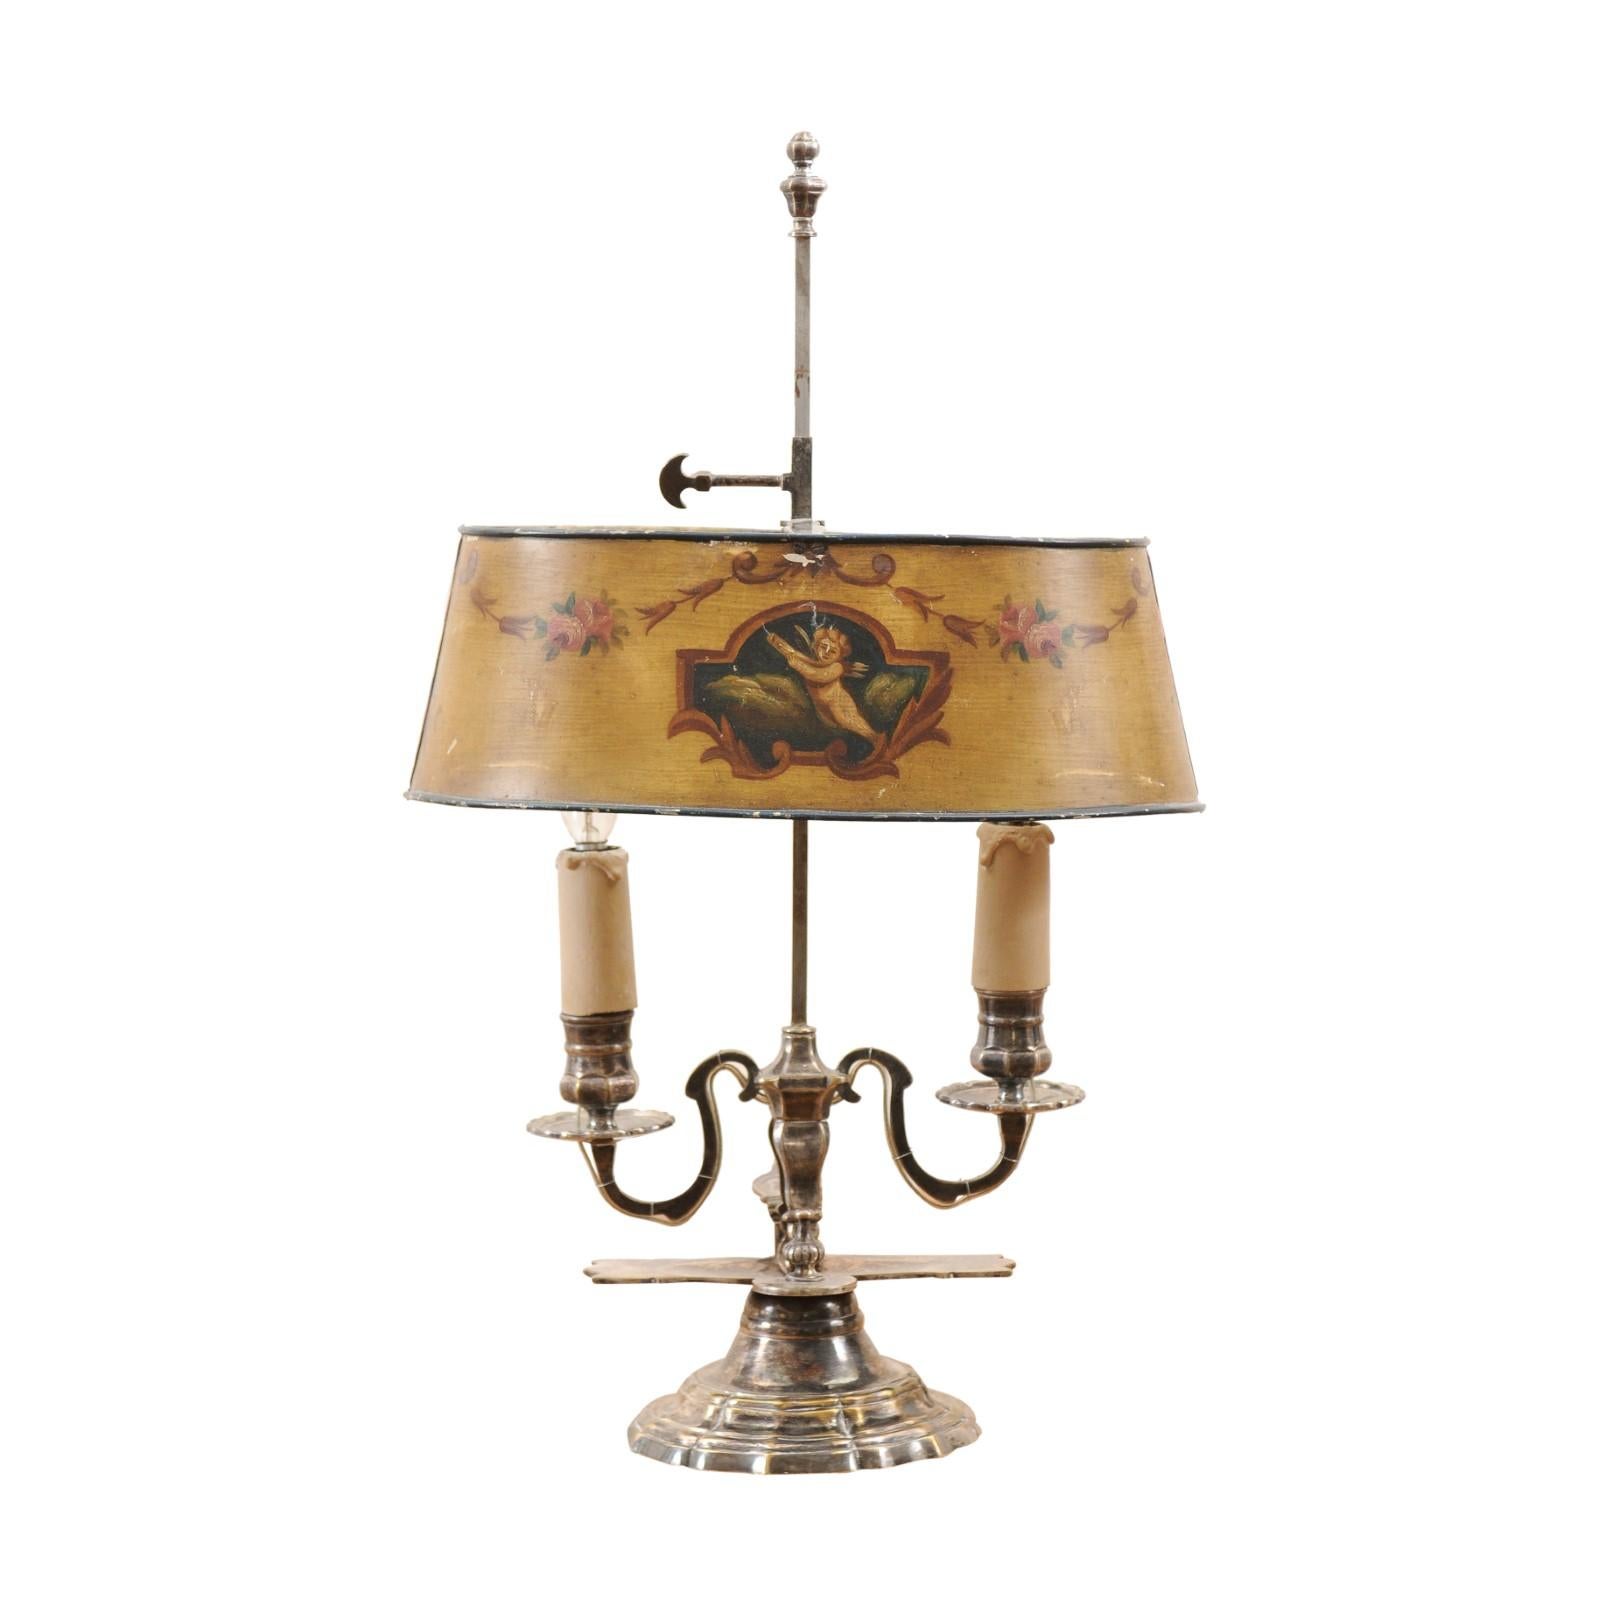 French 1850s Napoléon III Painted Tôle Two-Light Lamp with Cherub and Roses For Sale